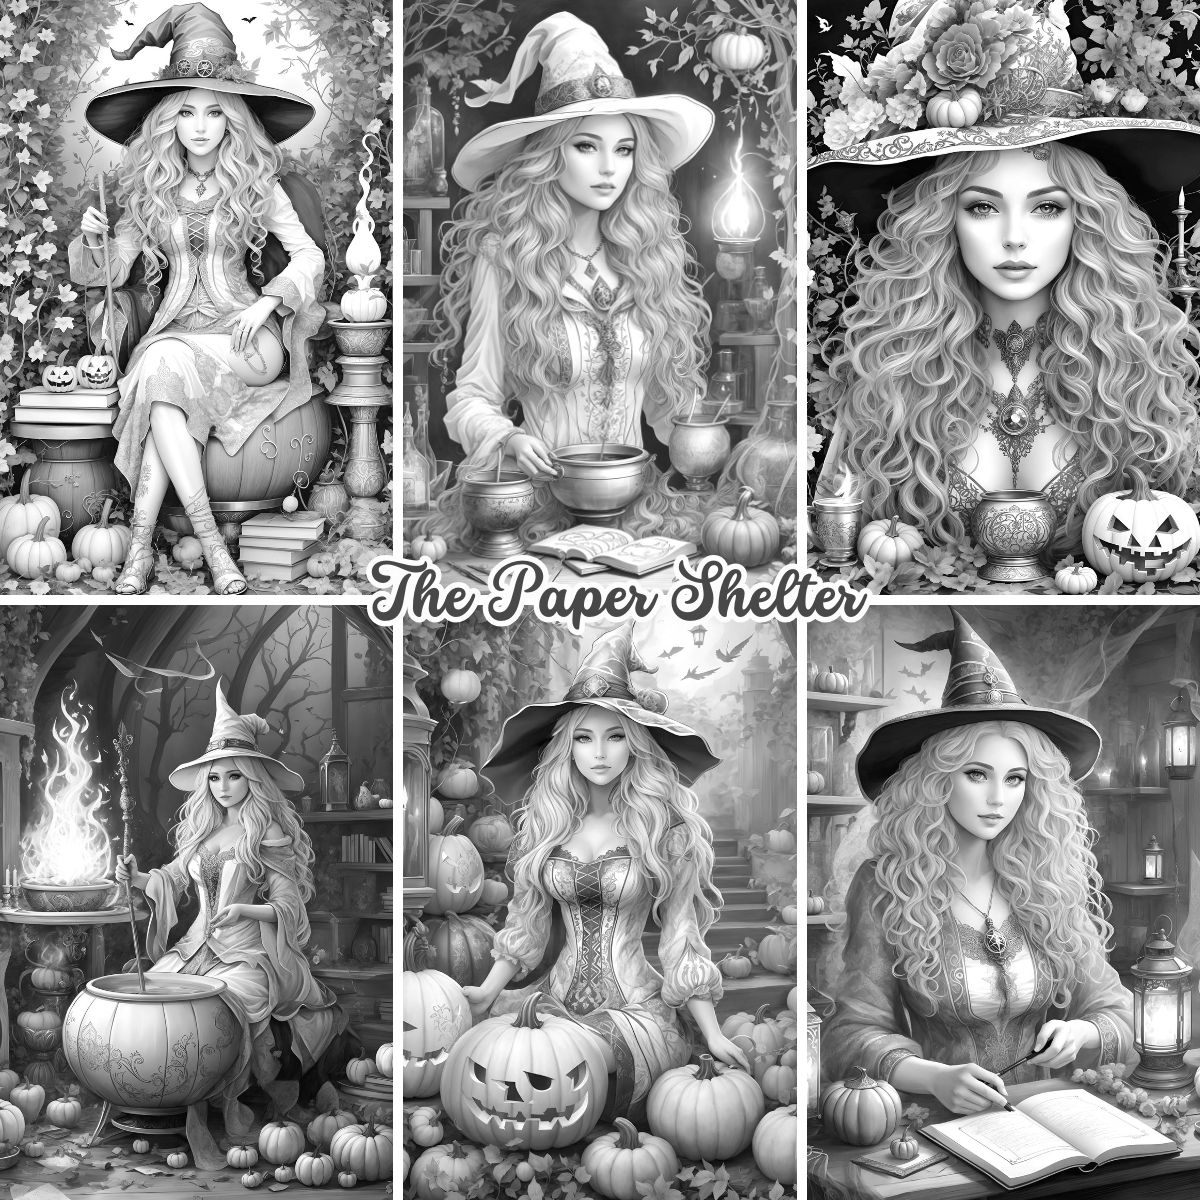 High Fantasy Witches - Digital Coloring Book